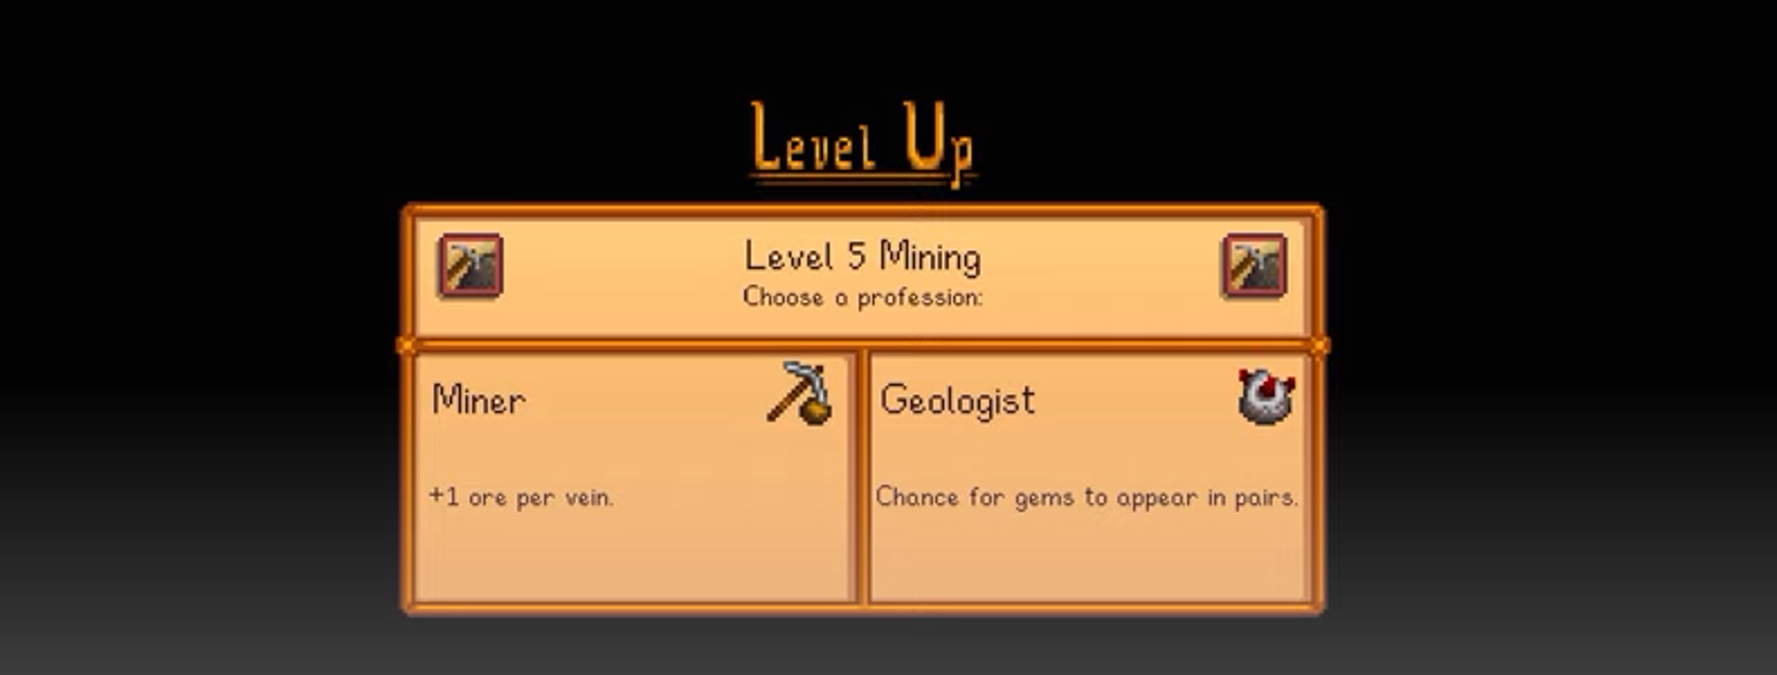 Stardew Valley Miner or Geologist at Level 5: Best Profession?